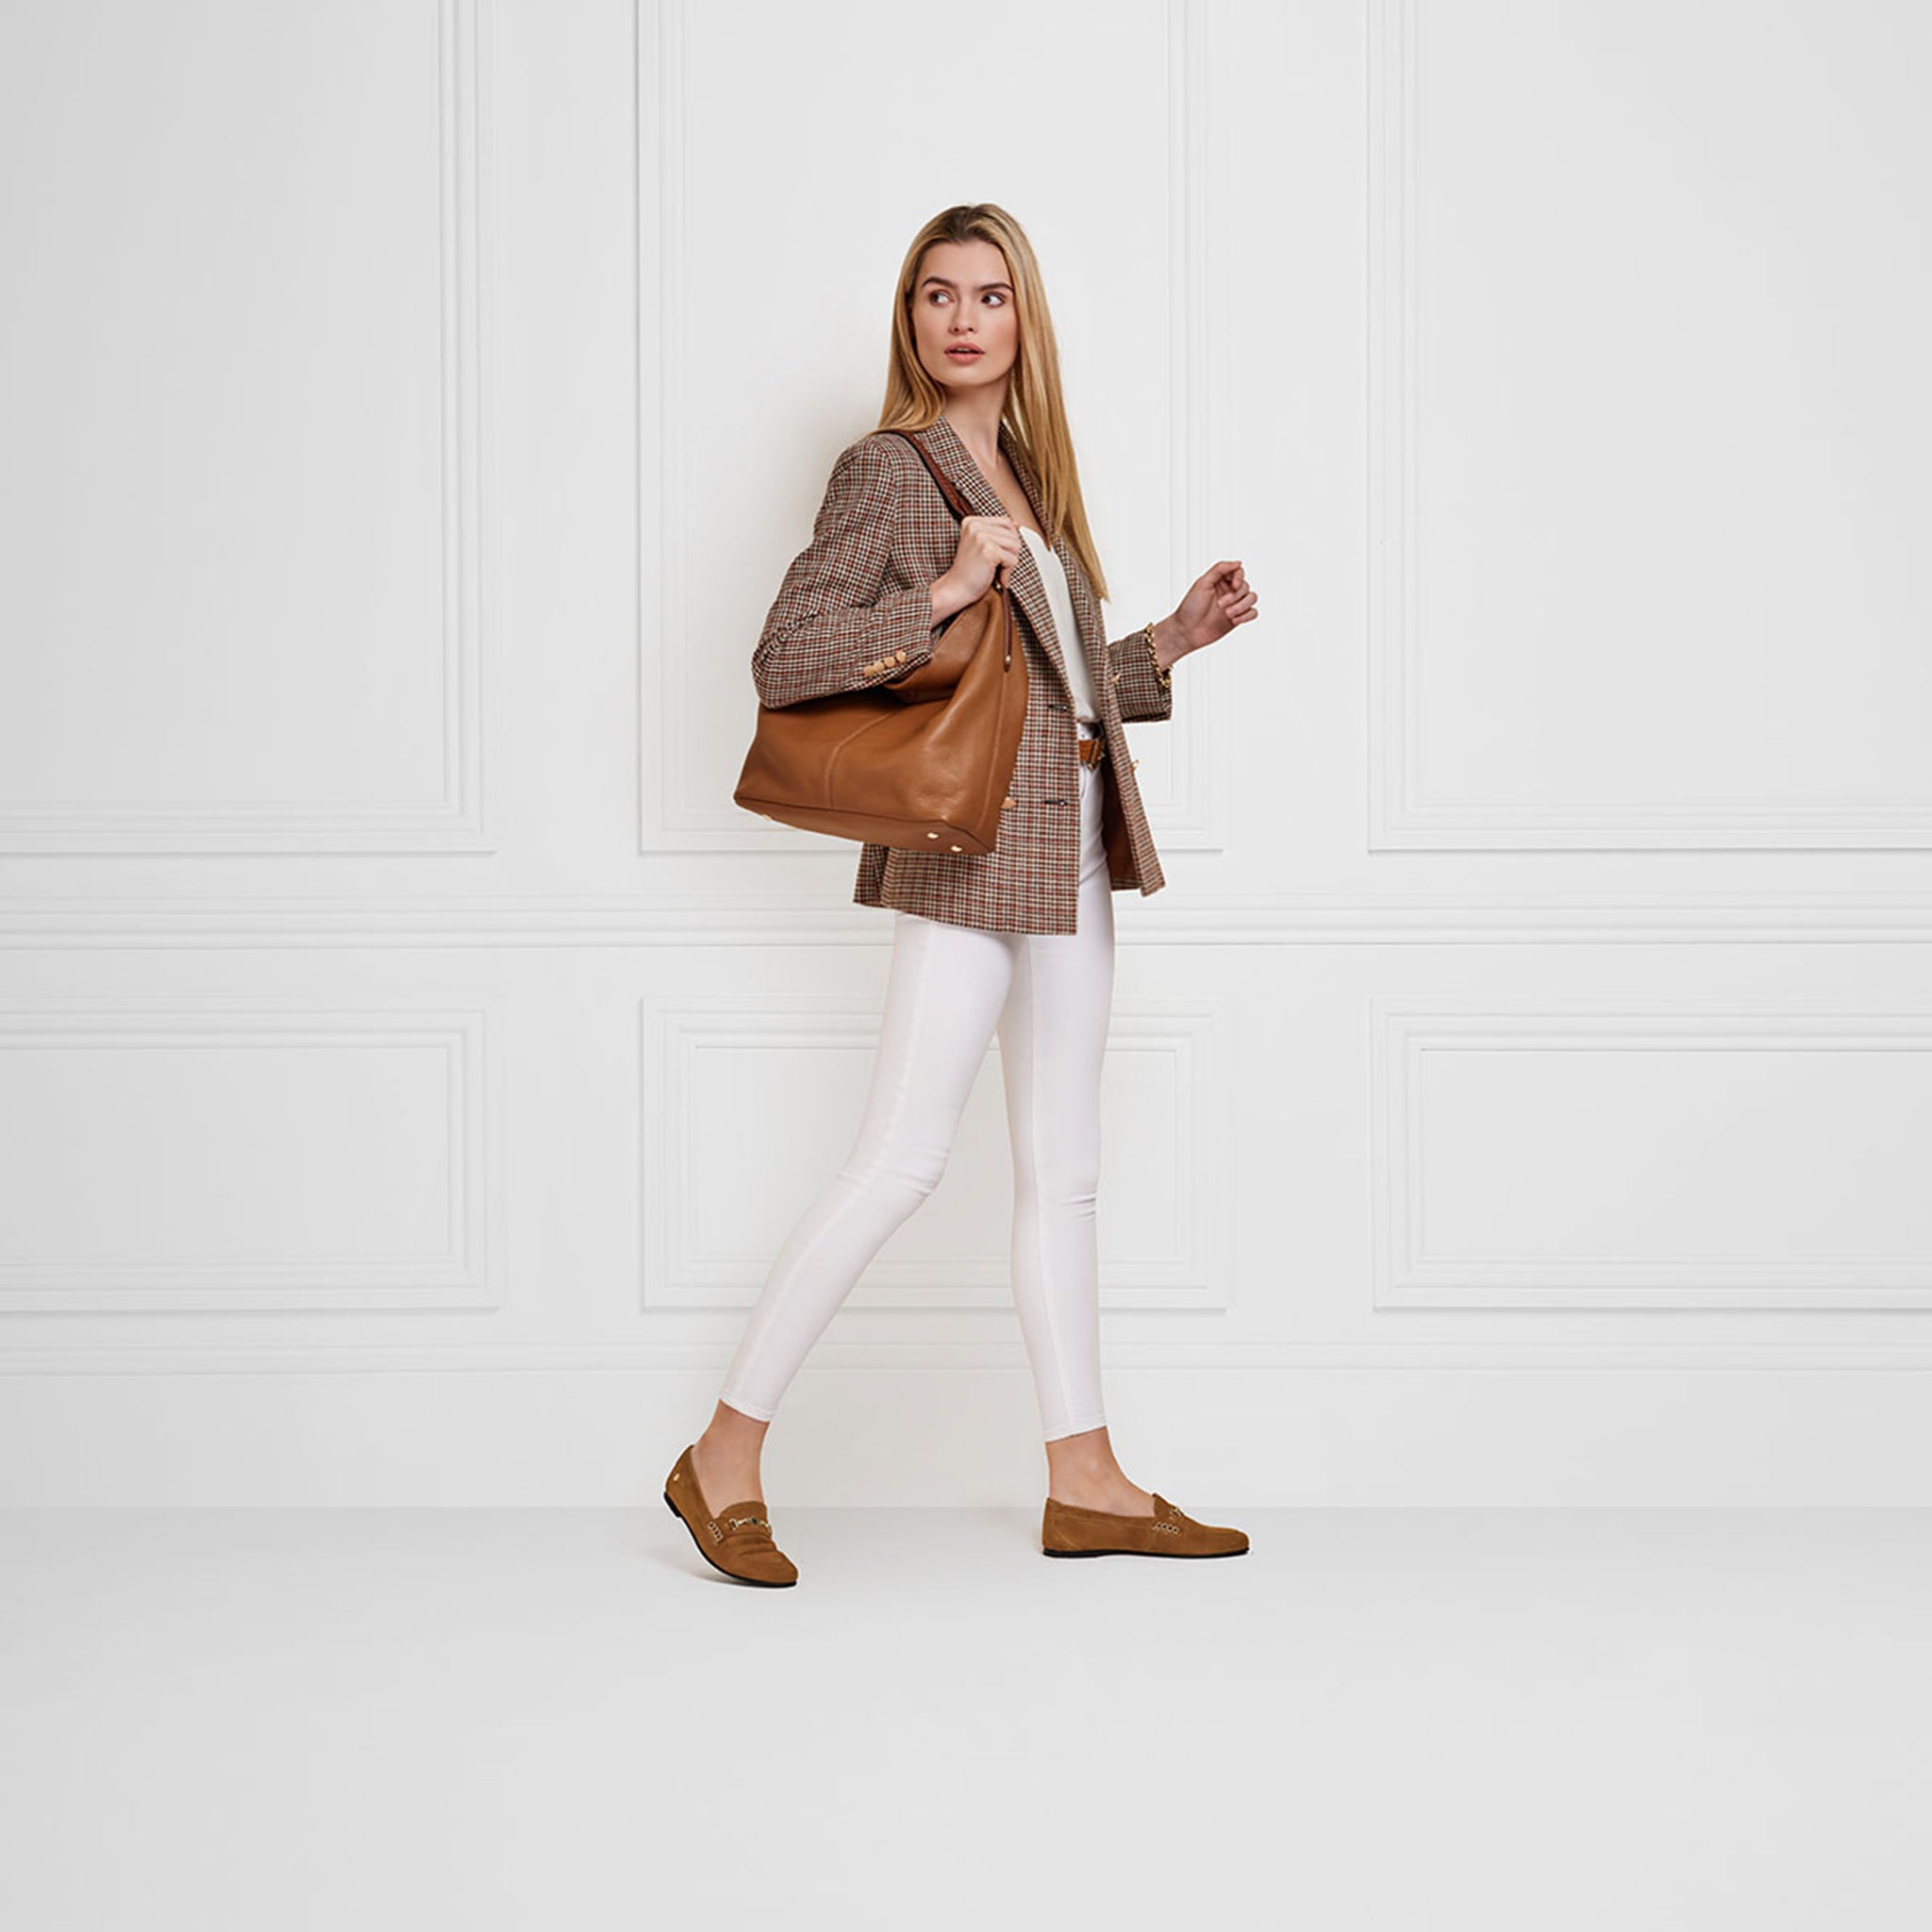 The Tetbury Tote Bag - Tan Leather